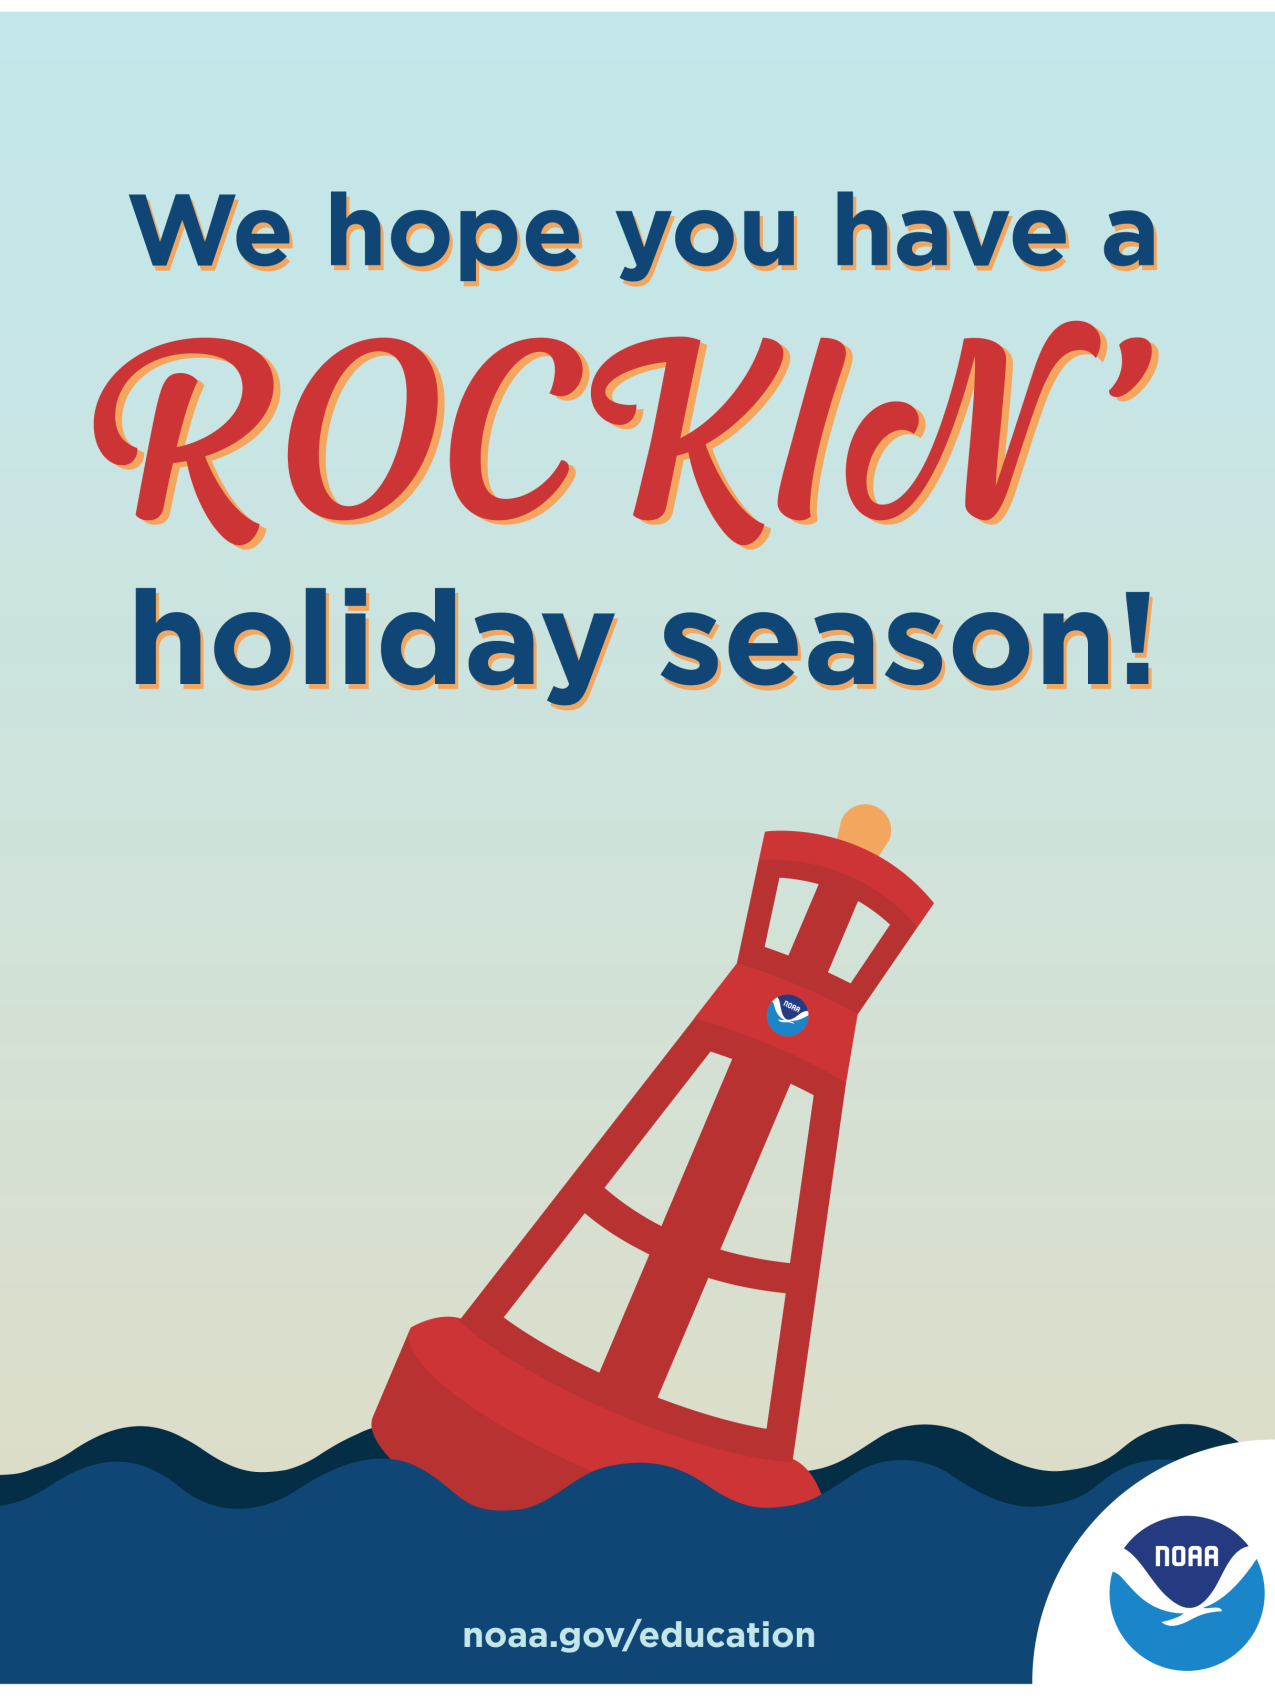 Sea-son's greetings from NOAA Education